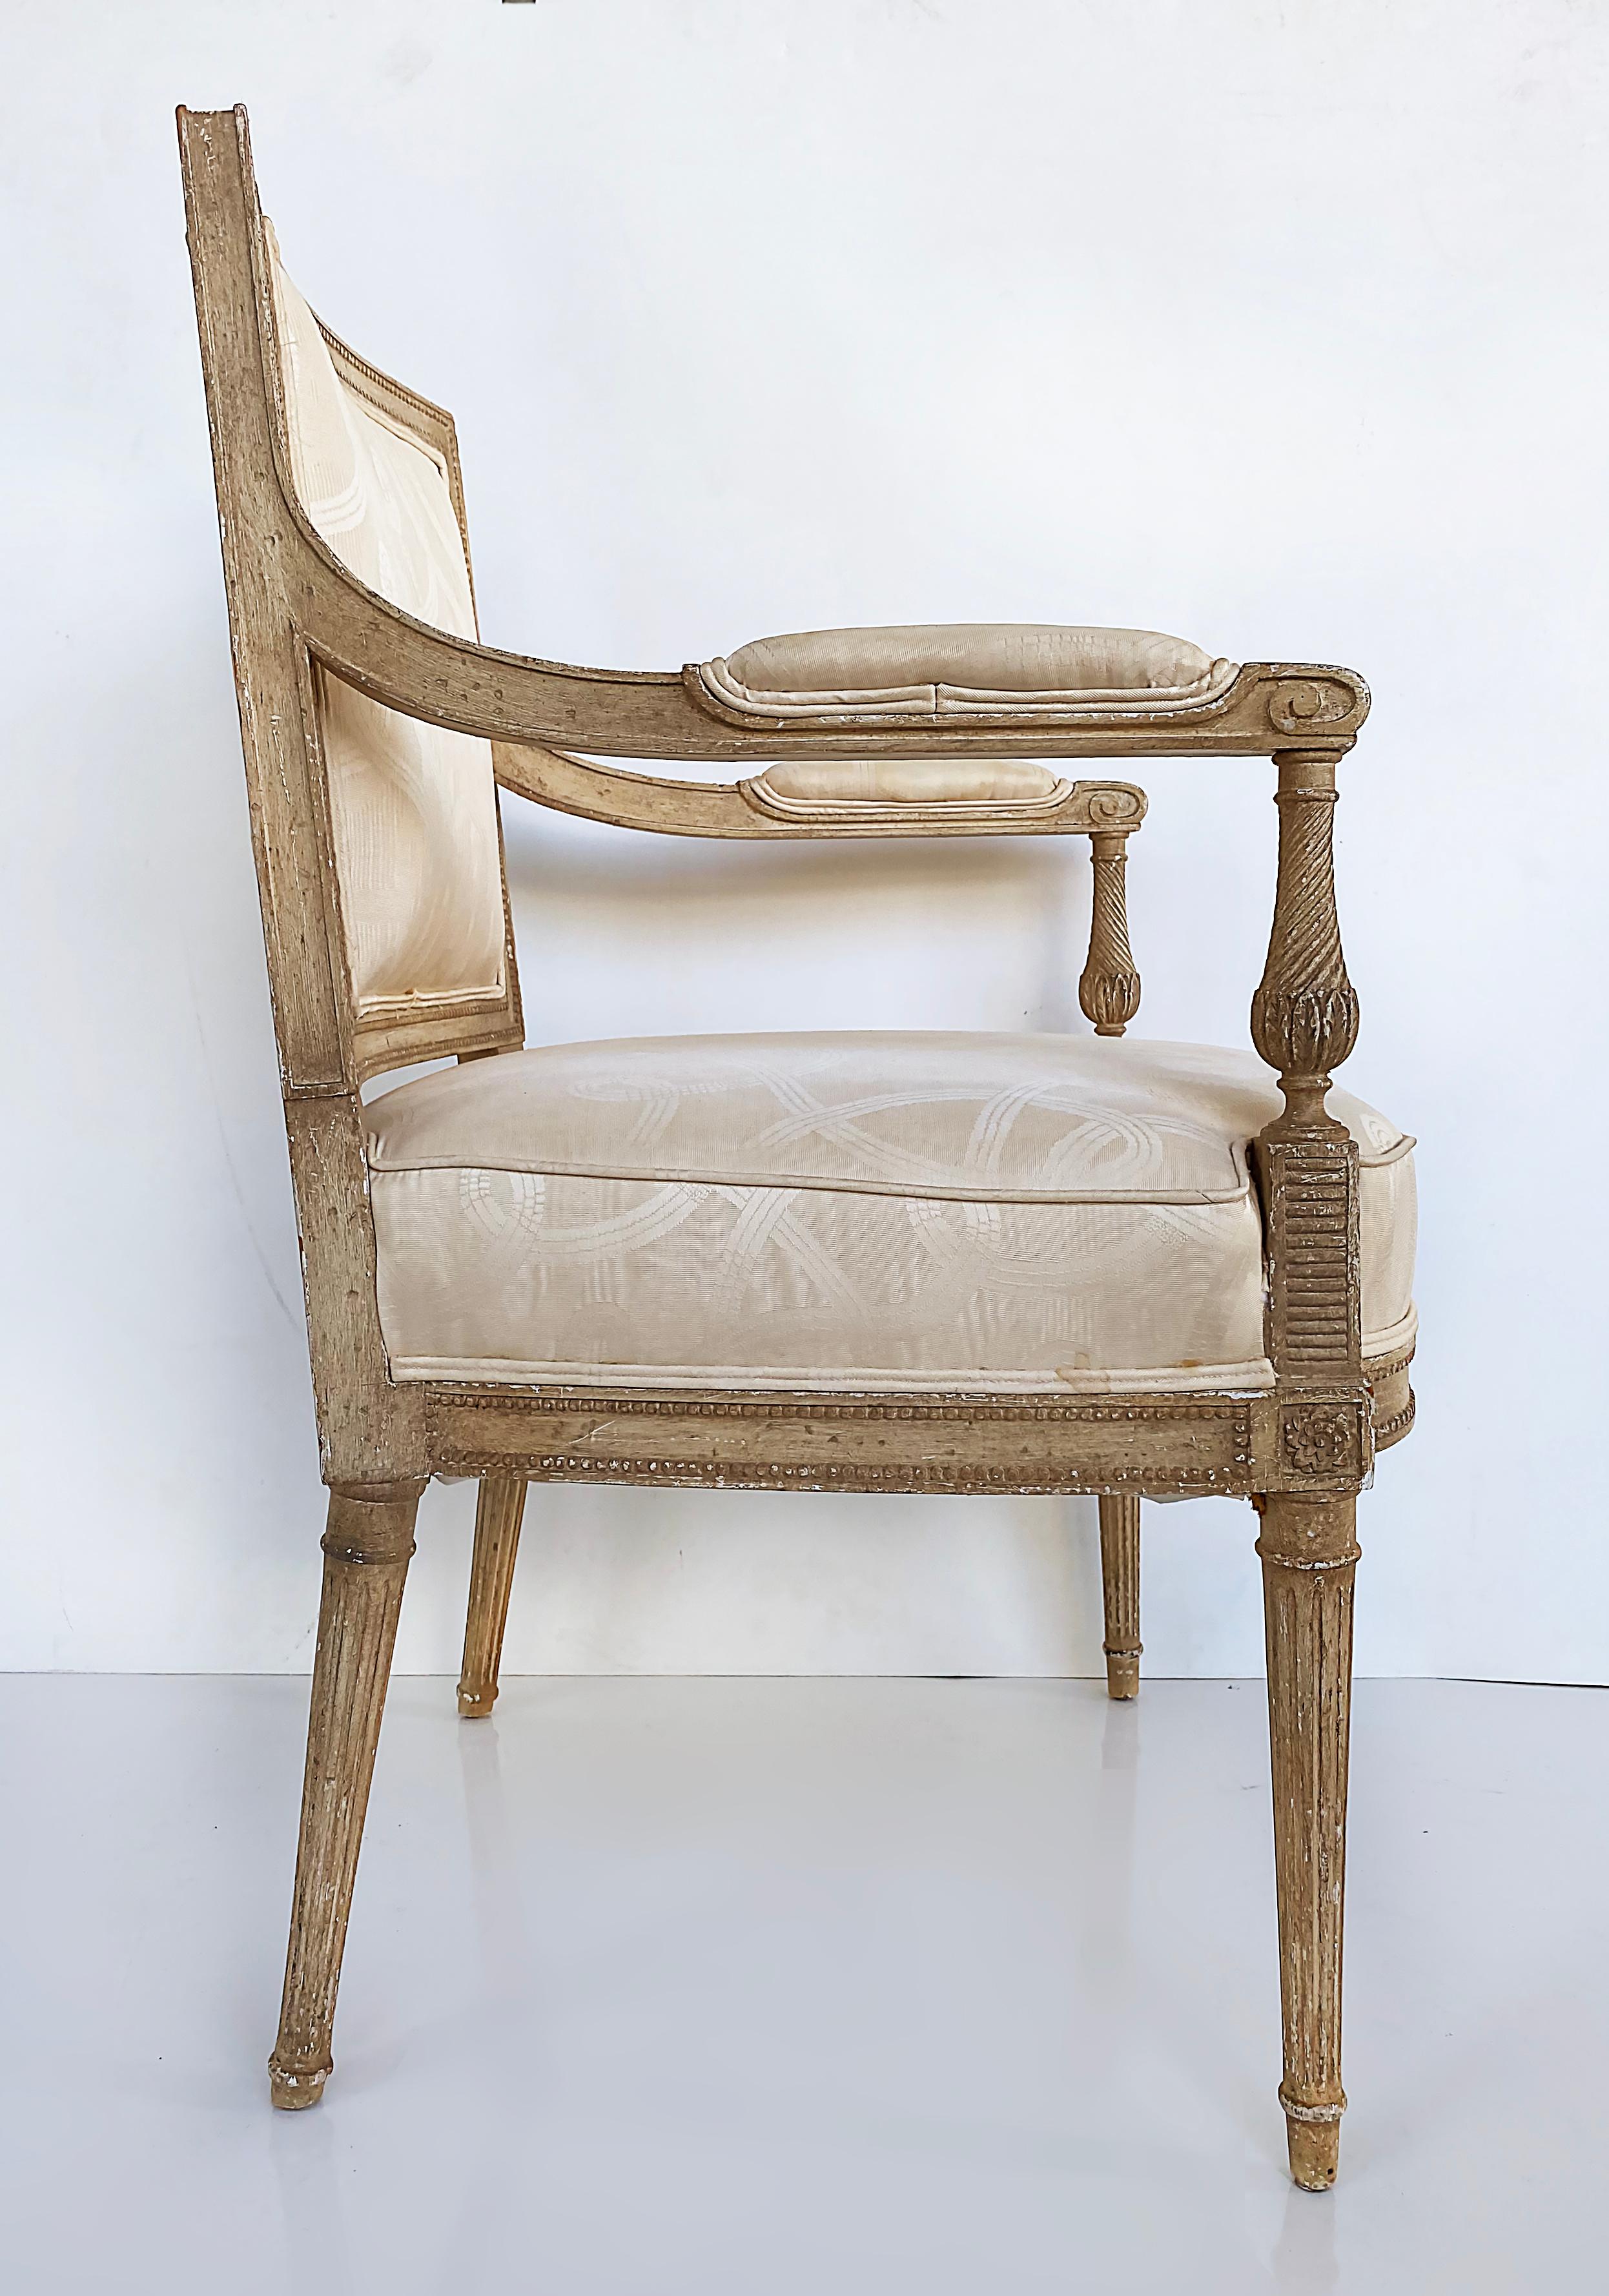 French Louis XVI Style Painted Fauteuil Armchairs, Late 19th Century -Early 20th For Sale 3